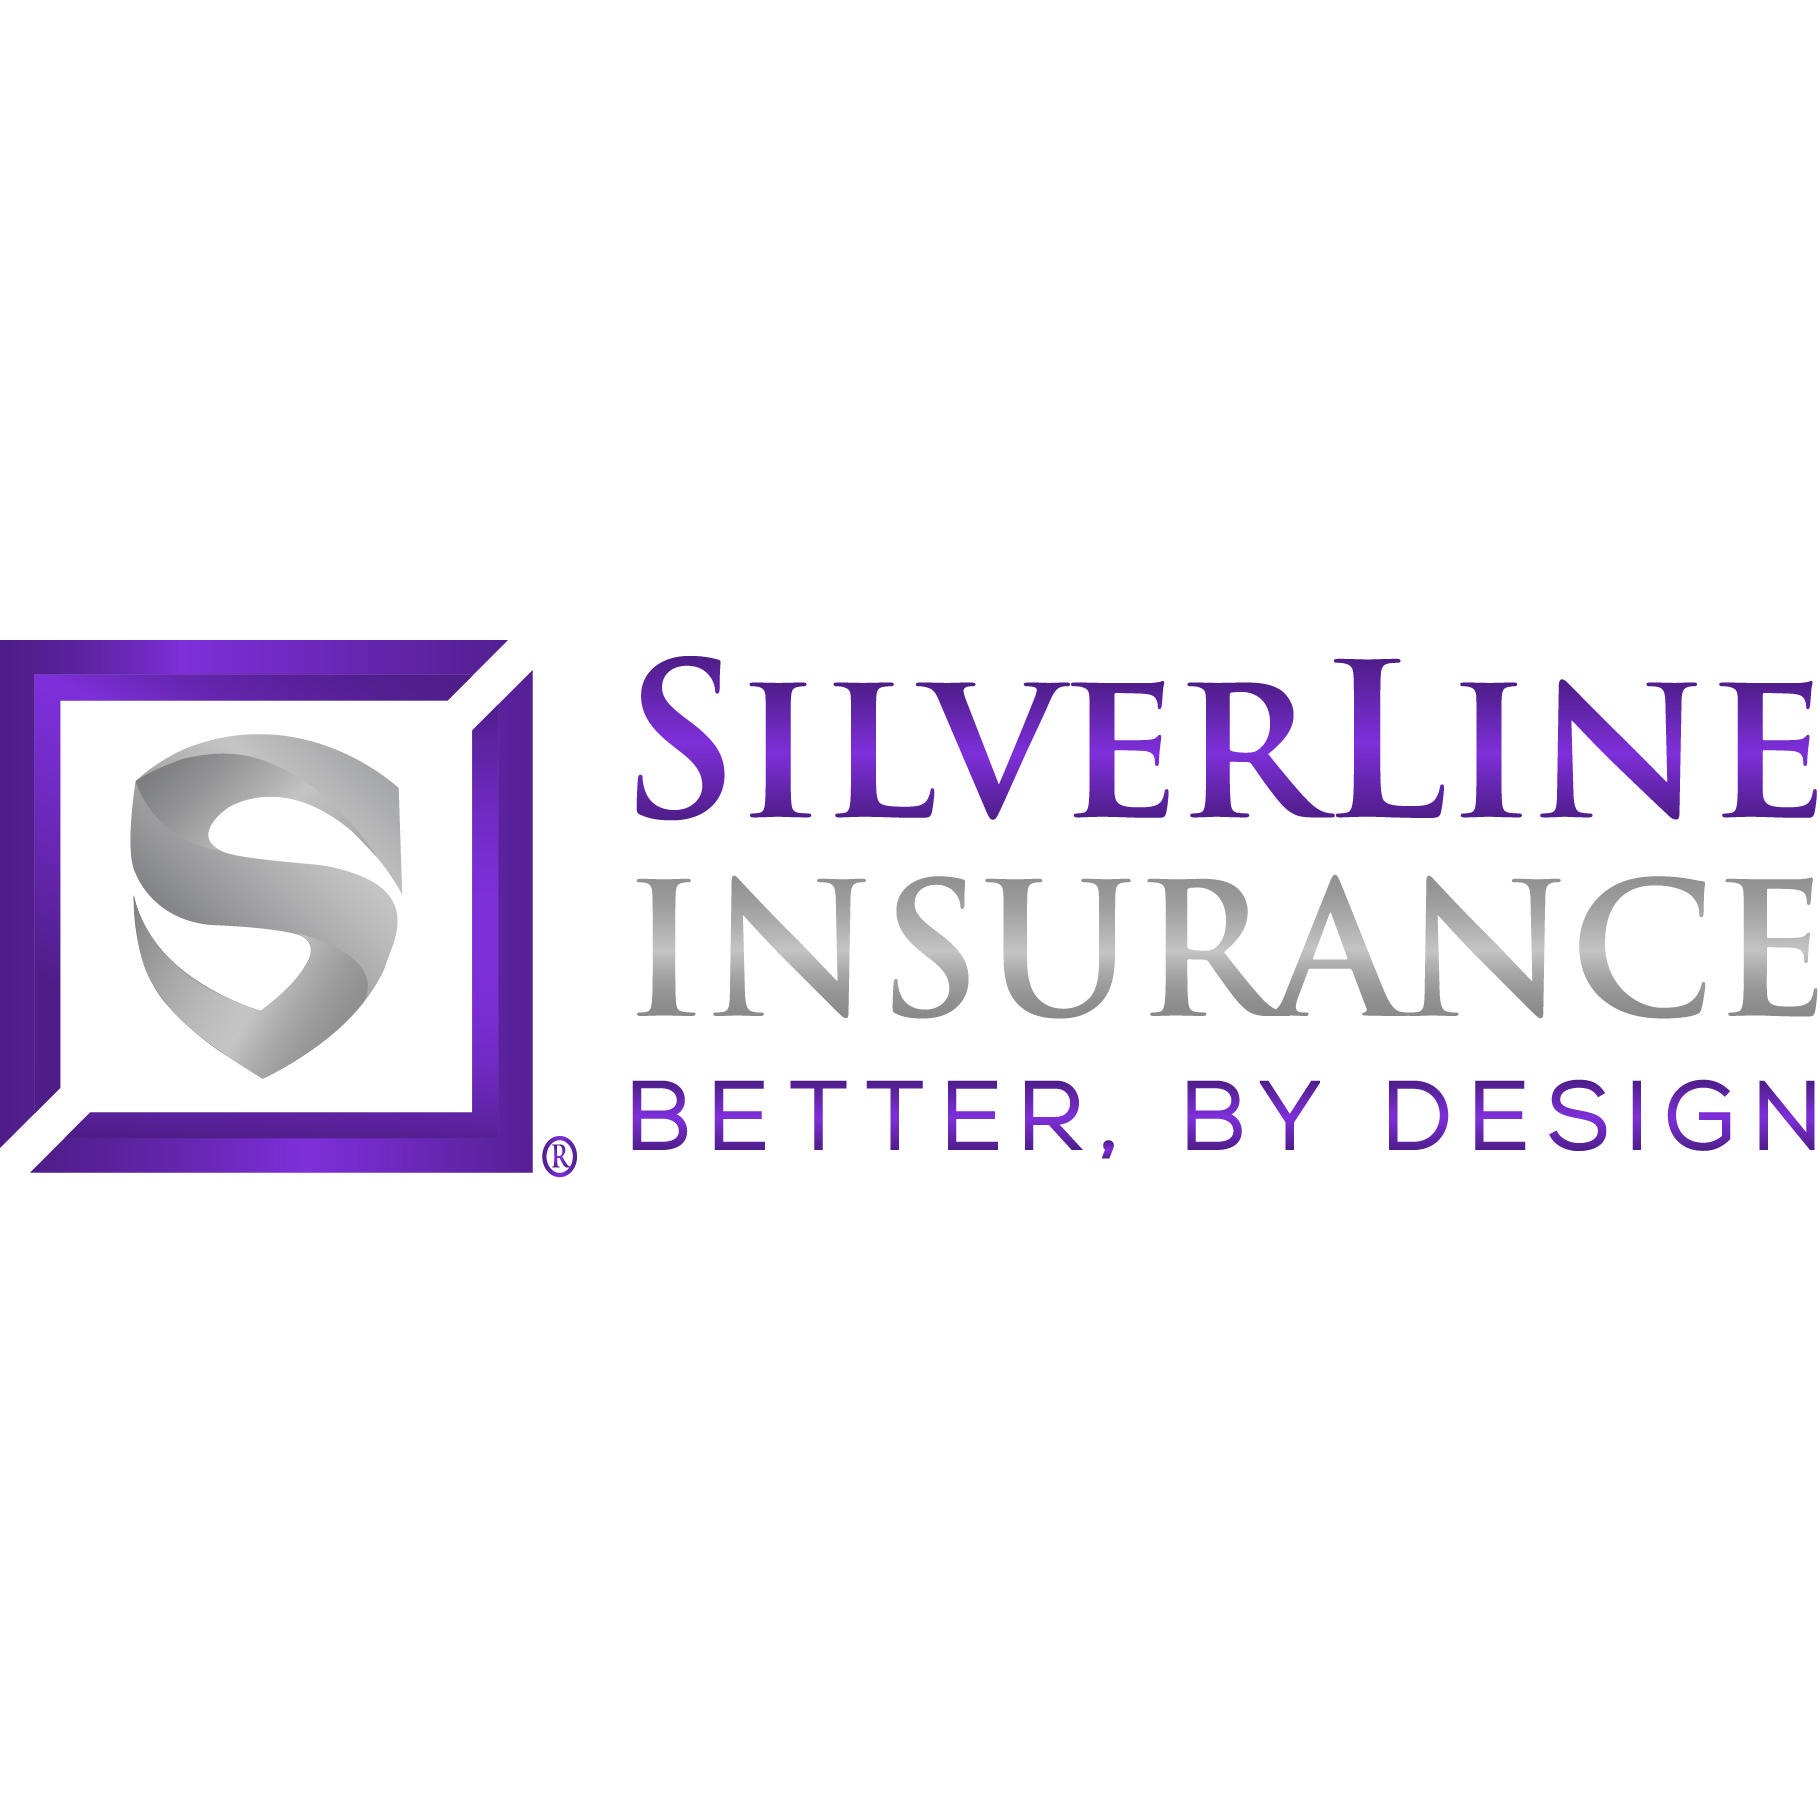 S Shield logo and Silverline Insurance better by design wording